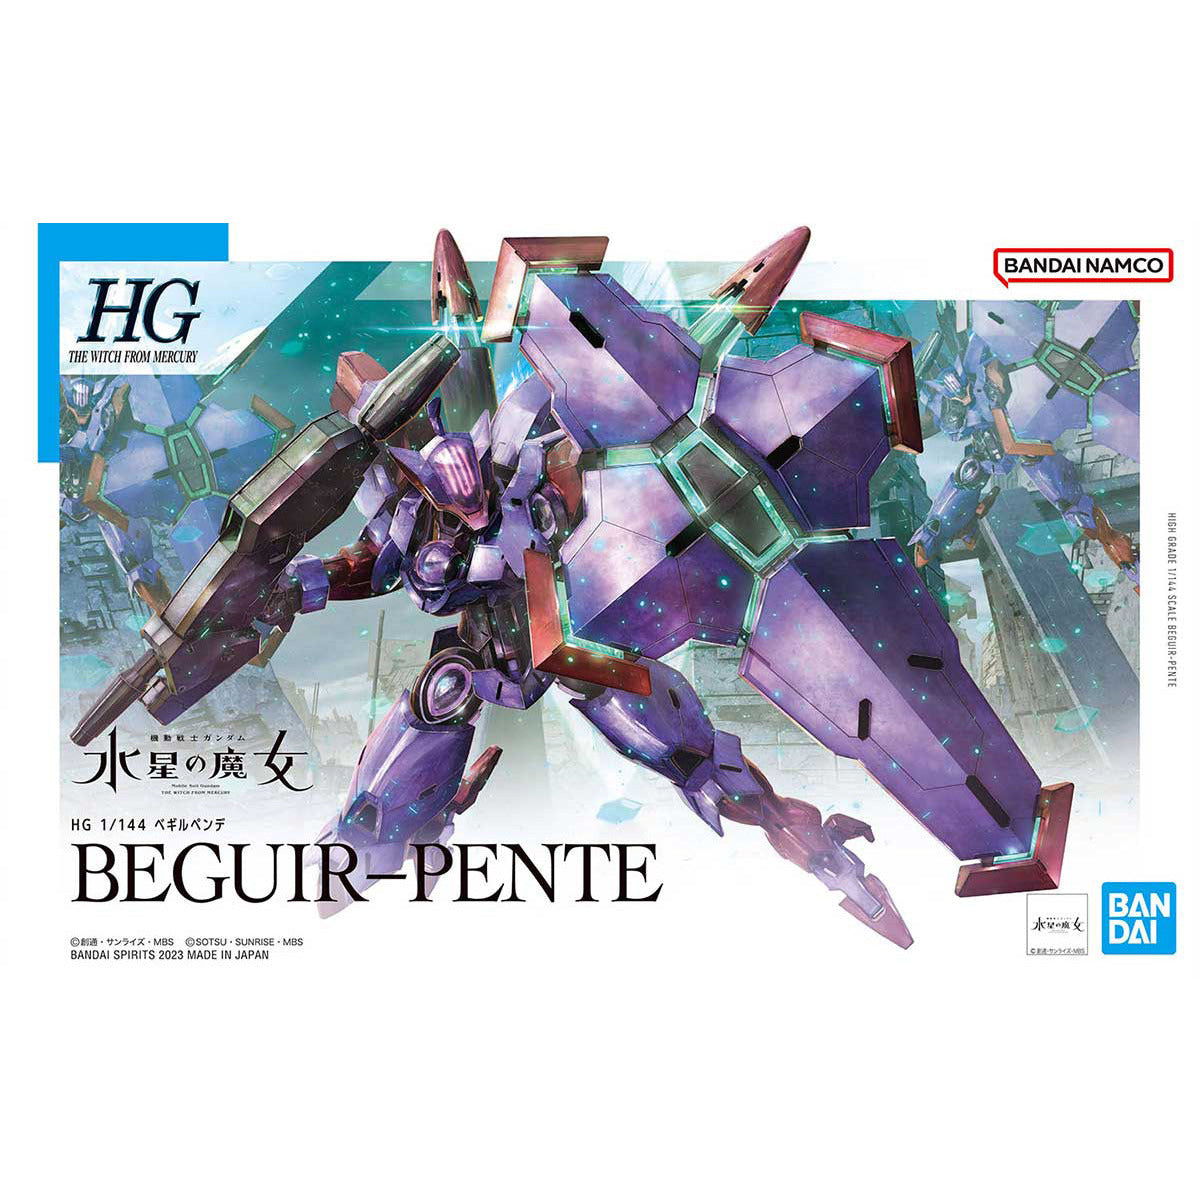 HG 1/144 The Witch From Mercury #12 CEK-077 Beguir-Pente #5065016 by Bandai